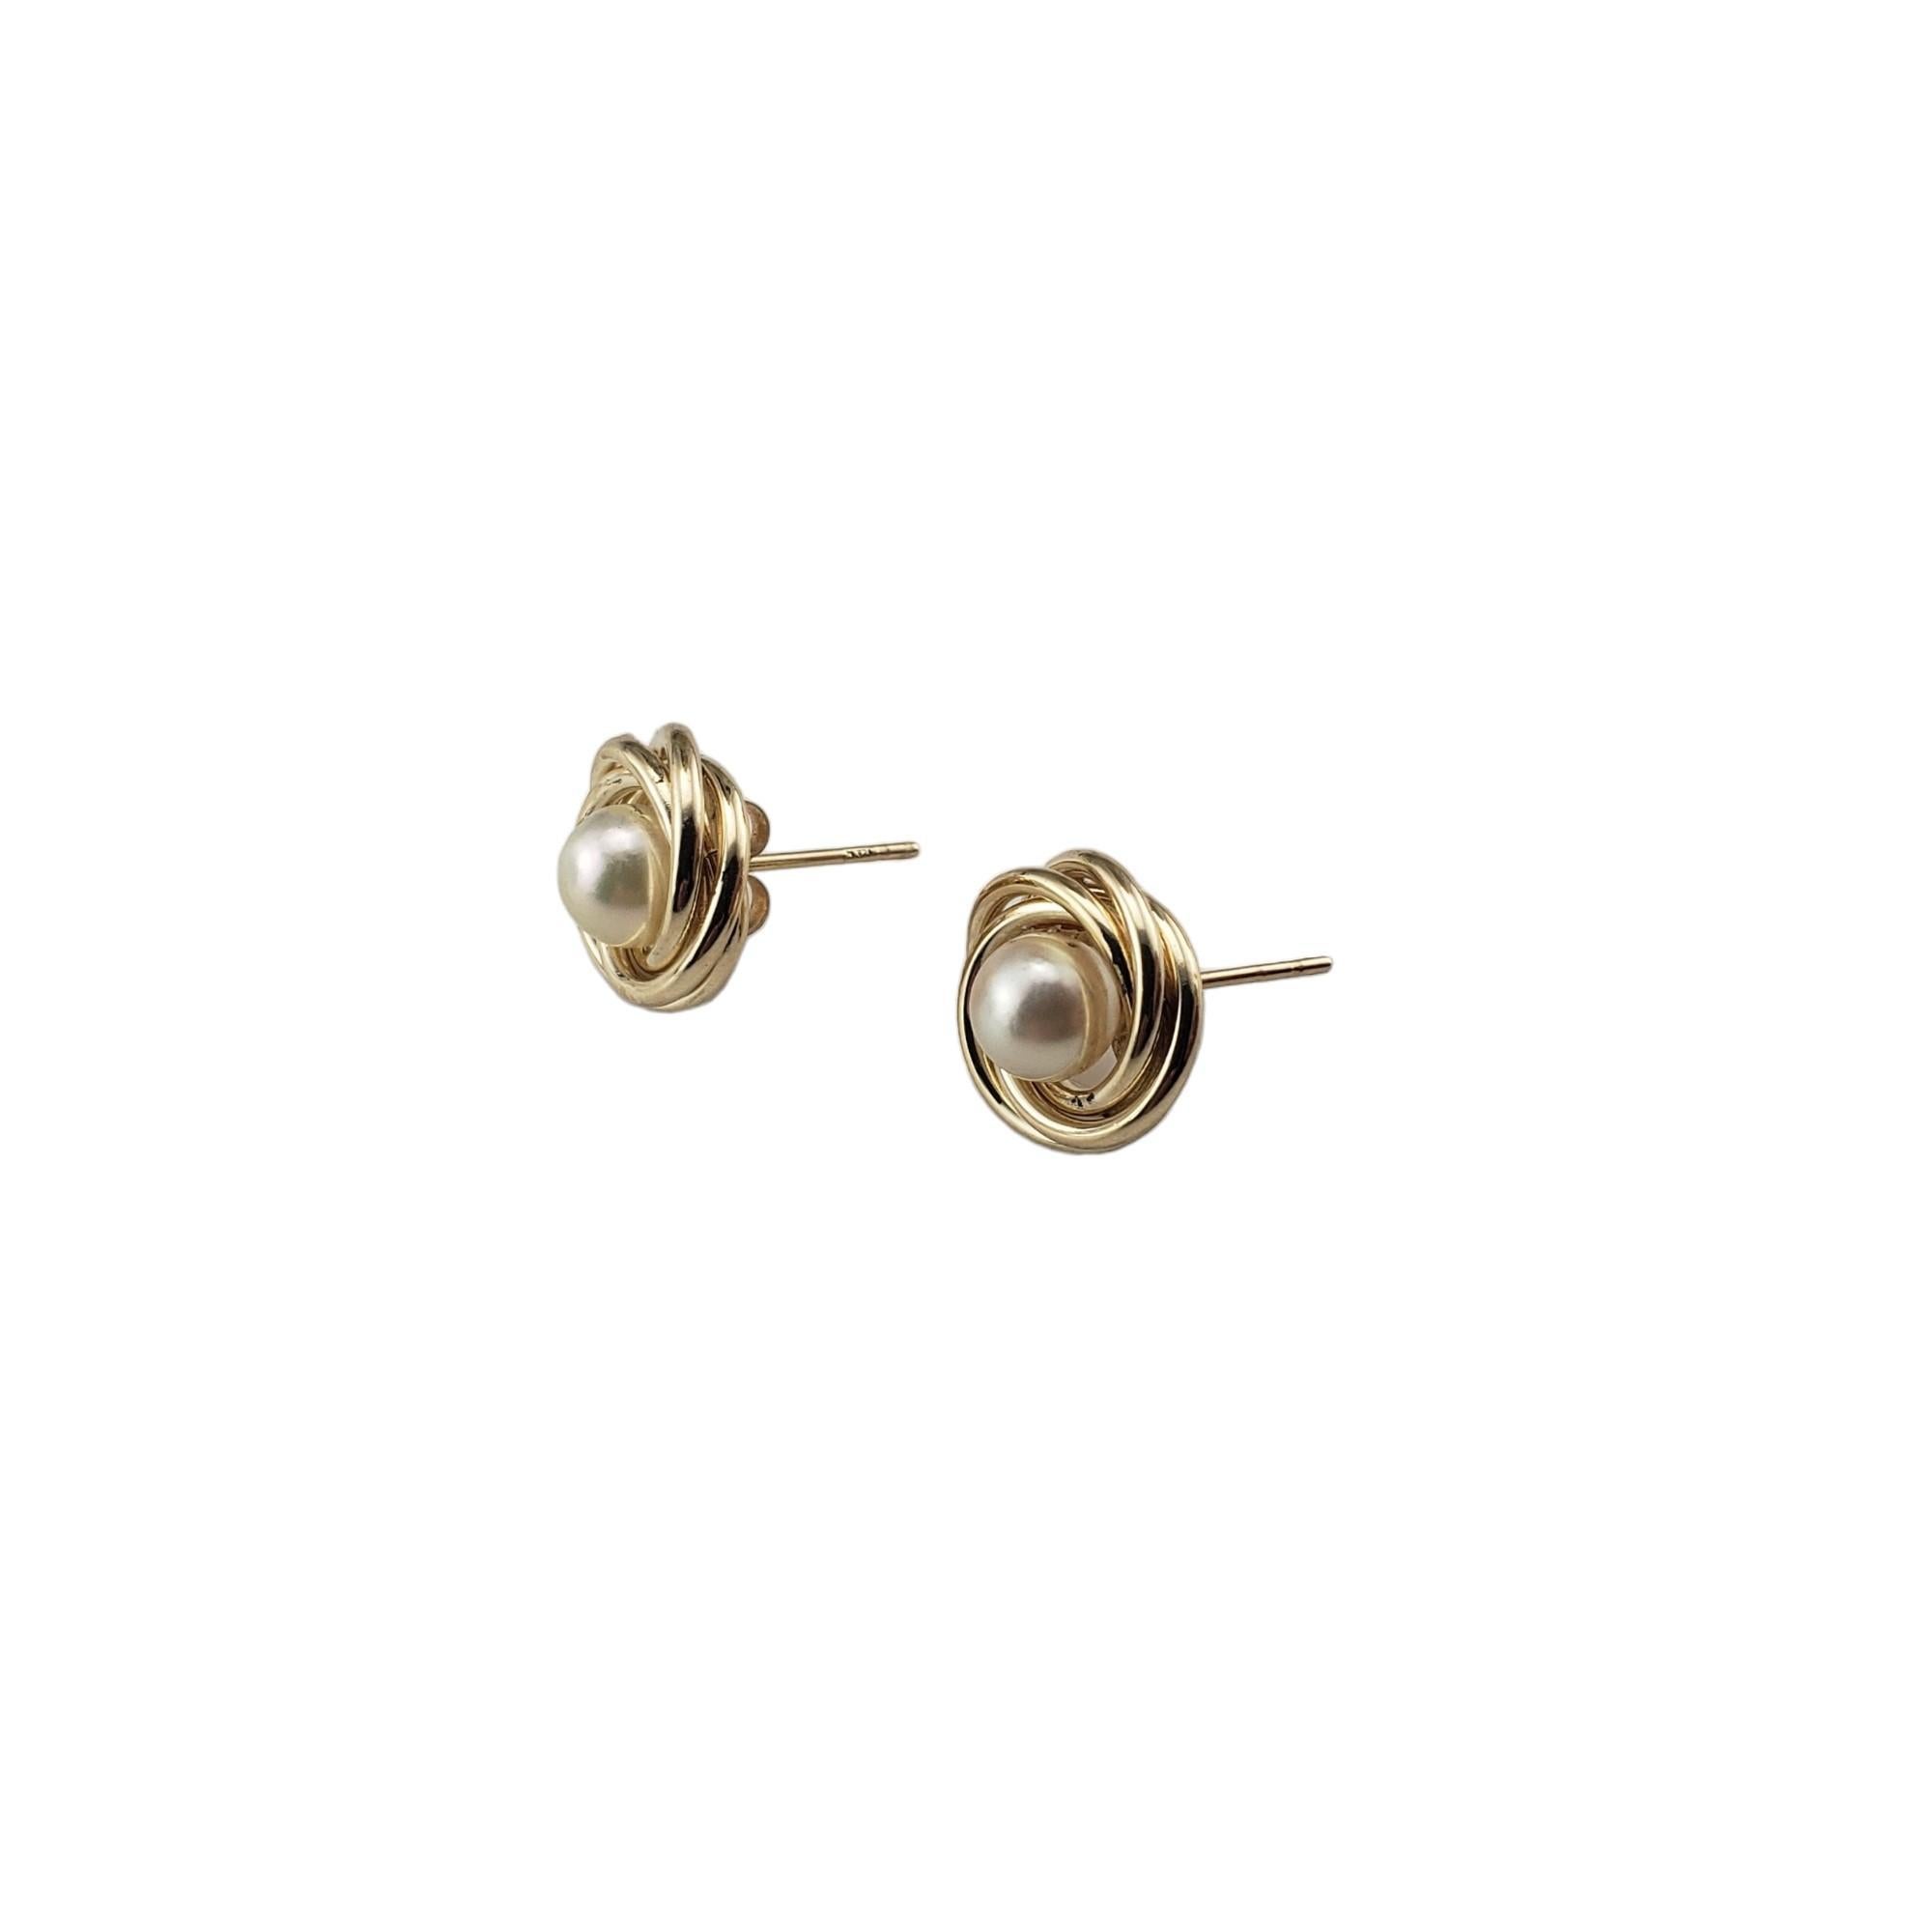  14 Karat Yellow Gold and Pearl Earrings #15516 In Good Condition For Sale In Washington Depot, CT